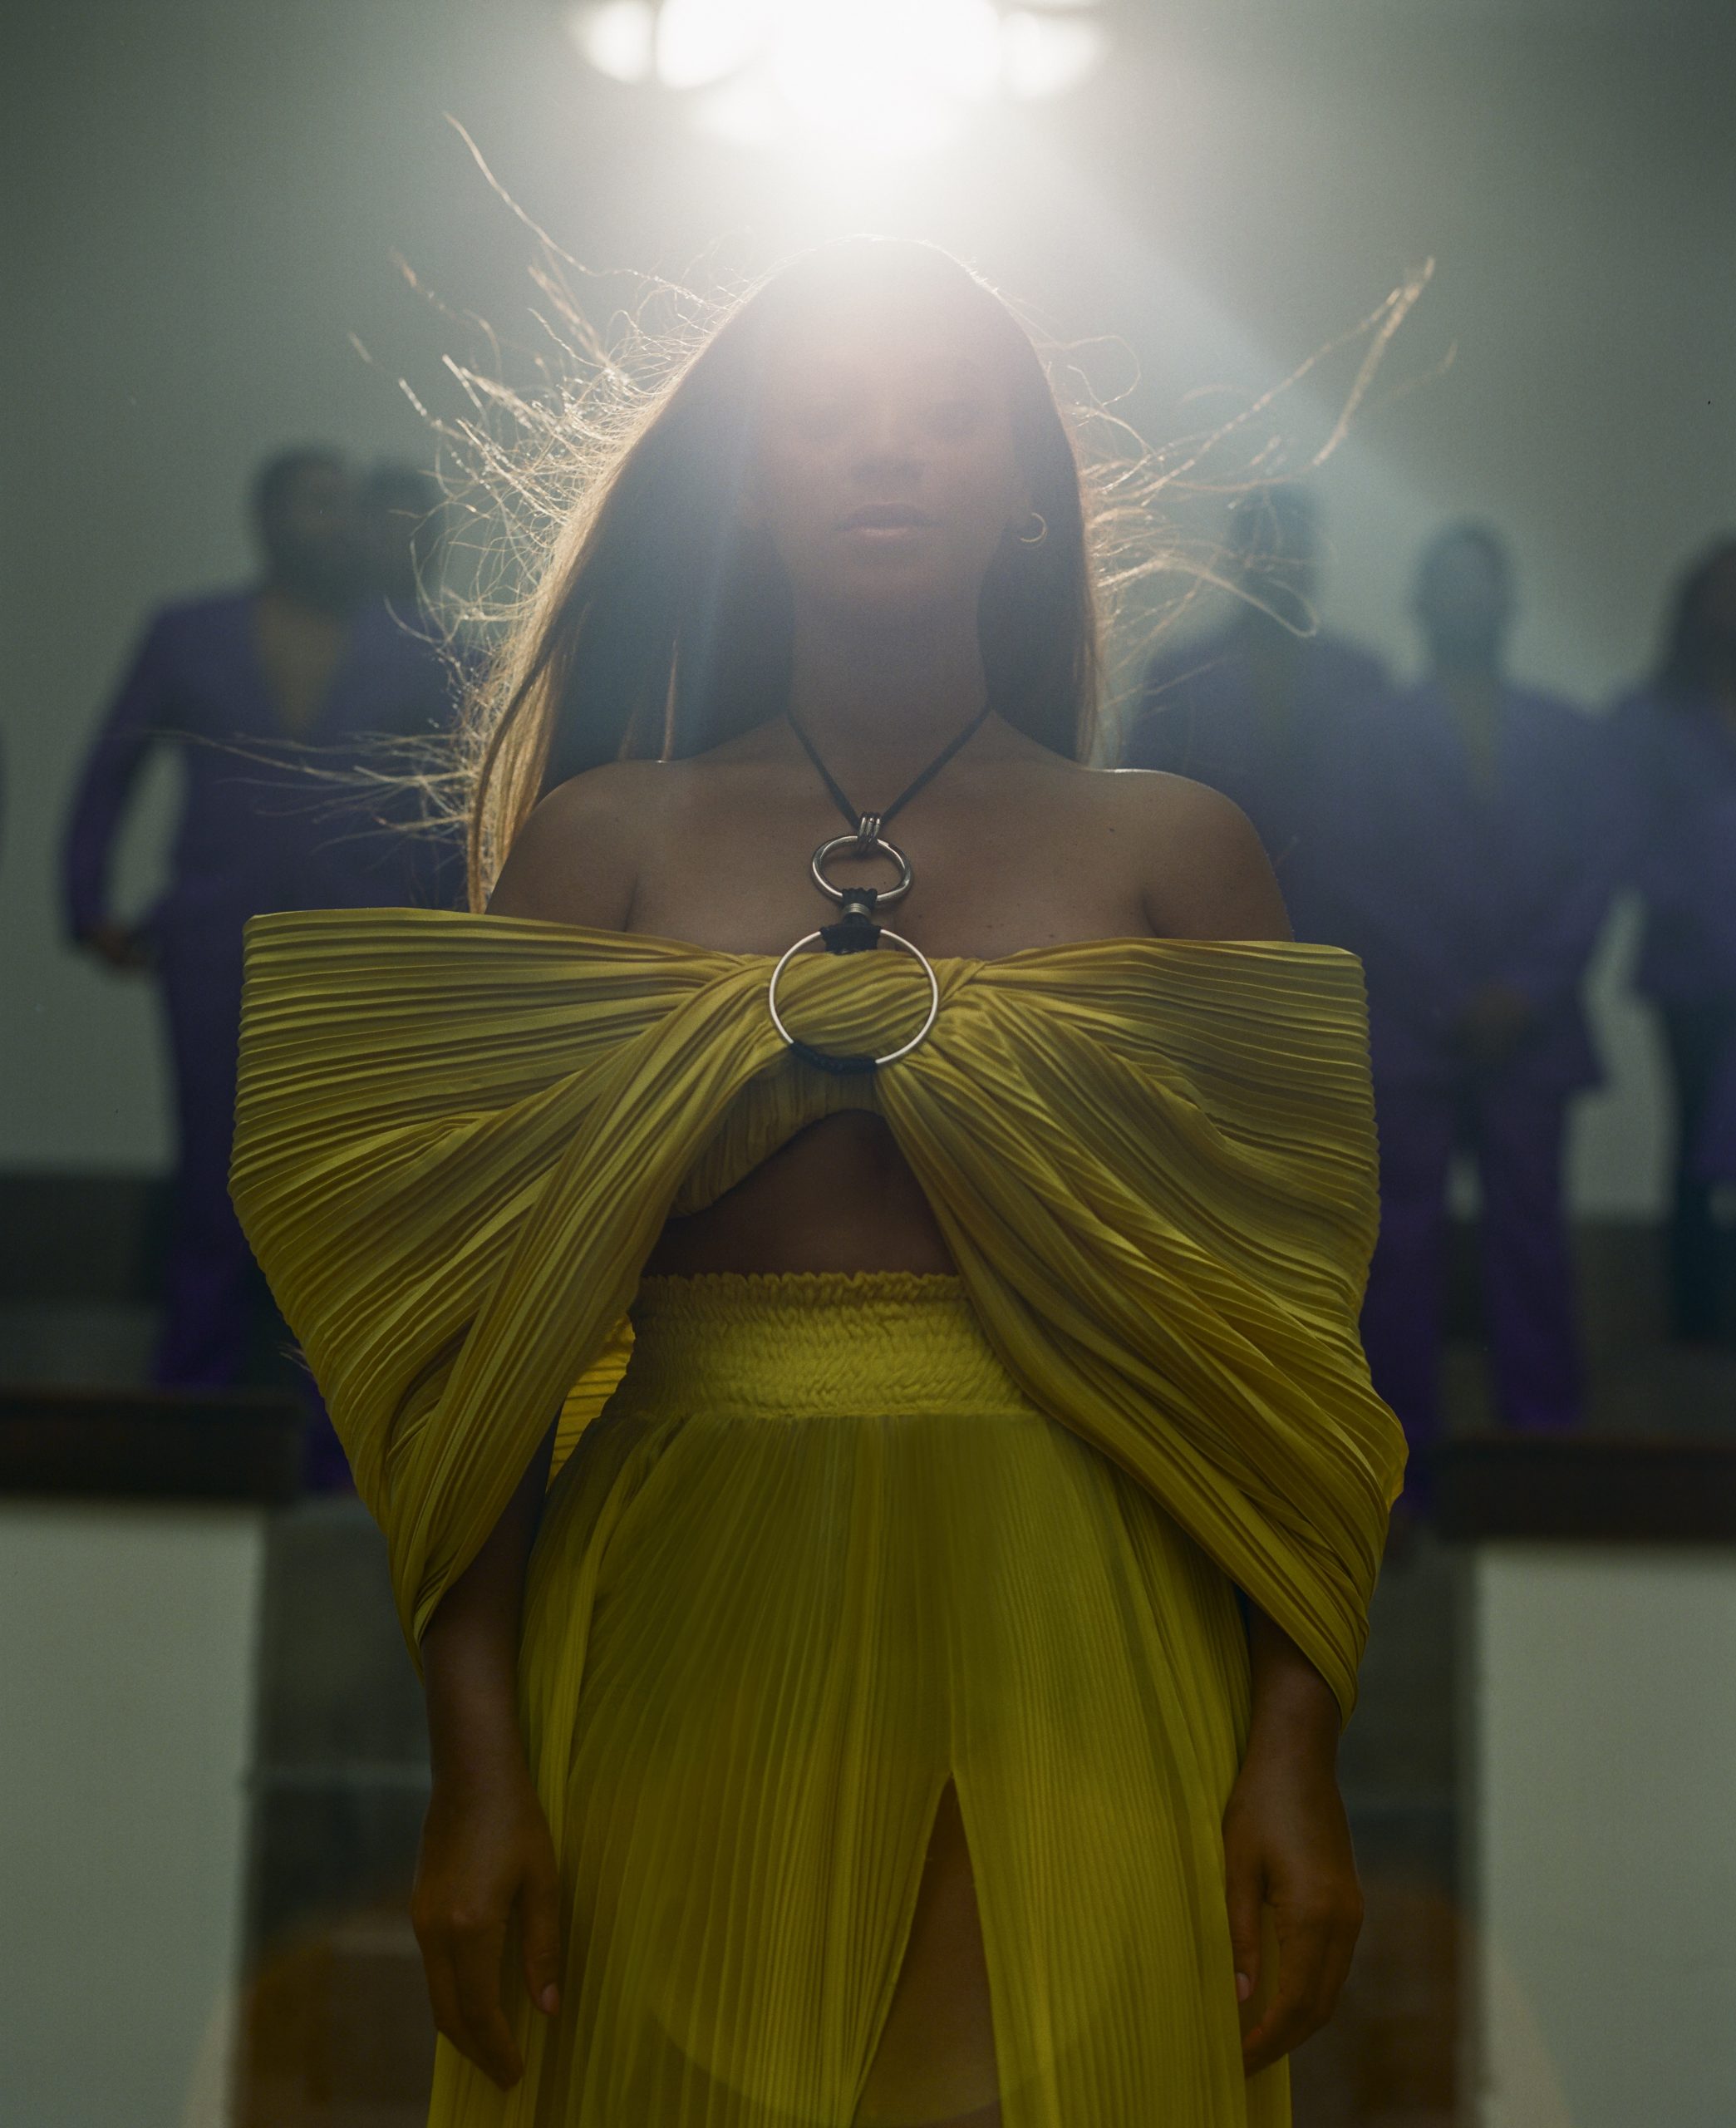 Beyonce Releases Visual Album, ‘Black Is King’ And Music Video ‘Already’